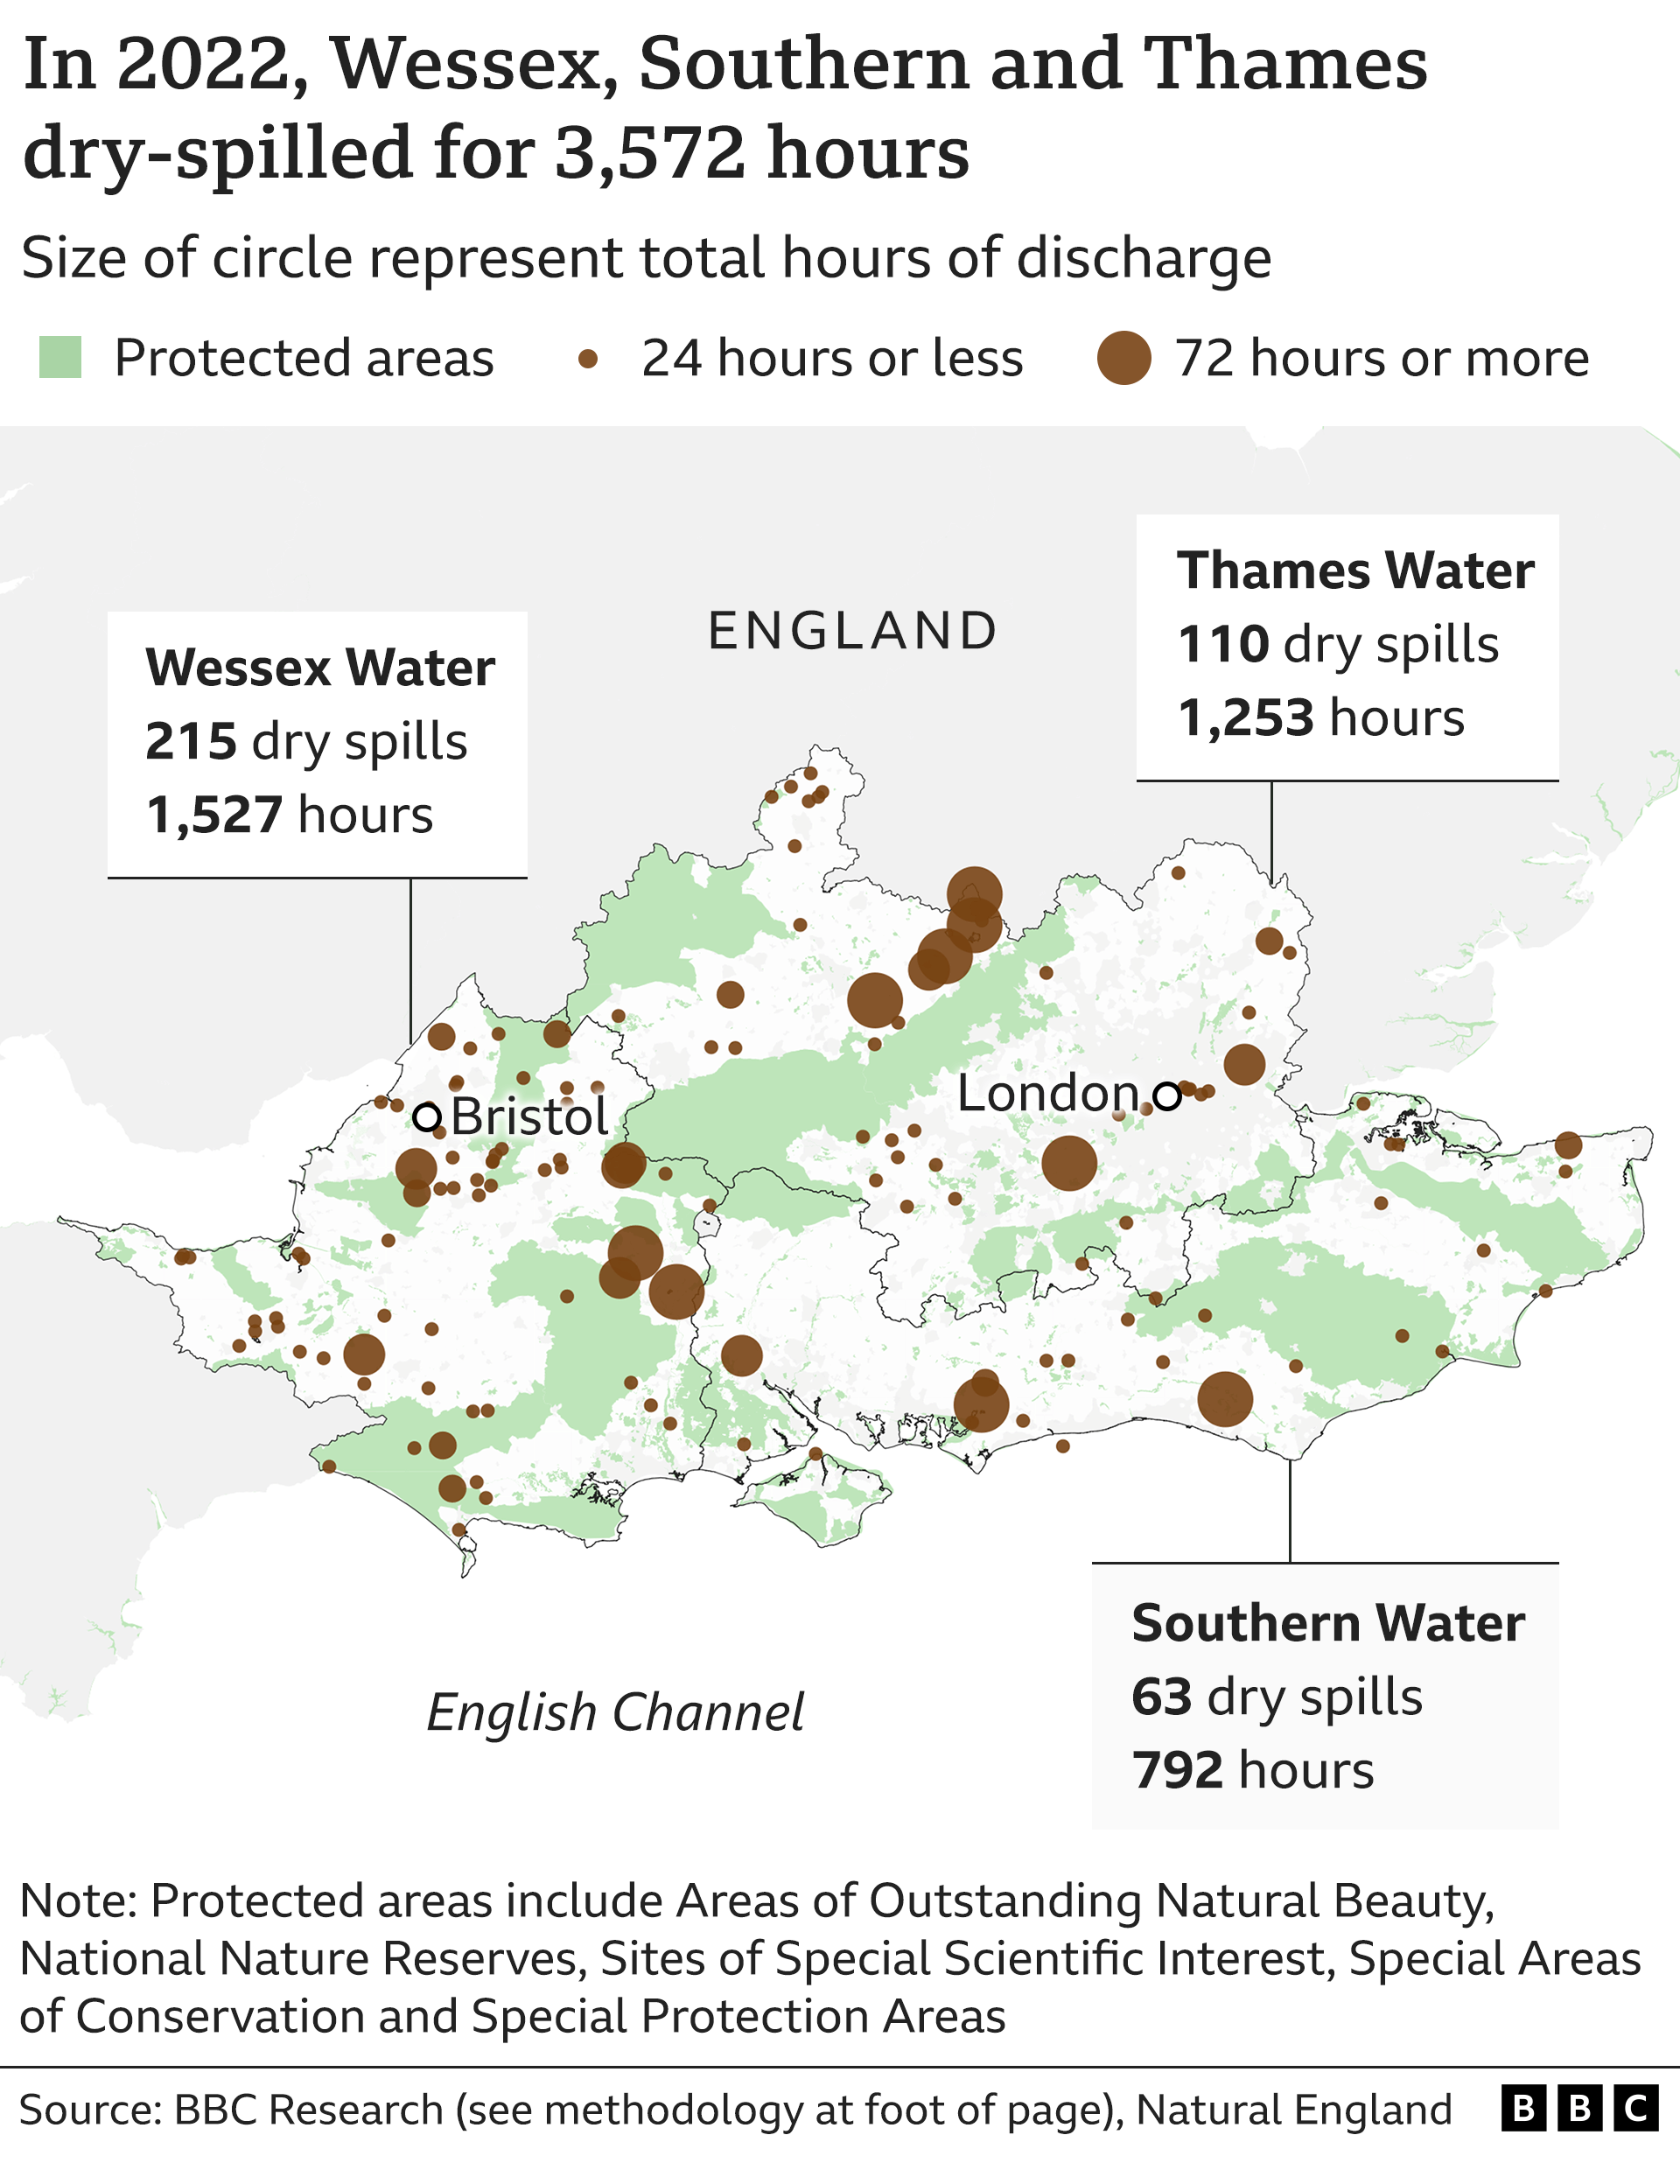 Graphic showing that in 2022, Southern, Wessex and Thames dry-spilled for 3,572 hours